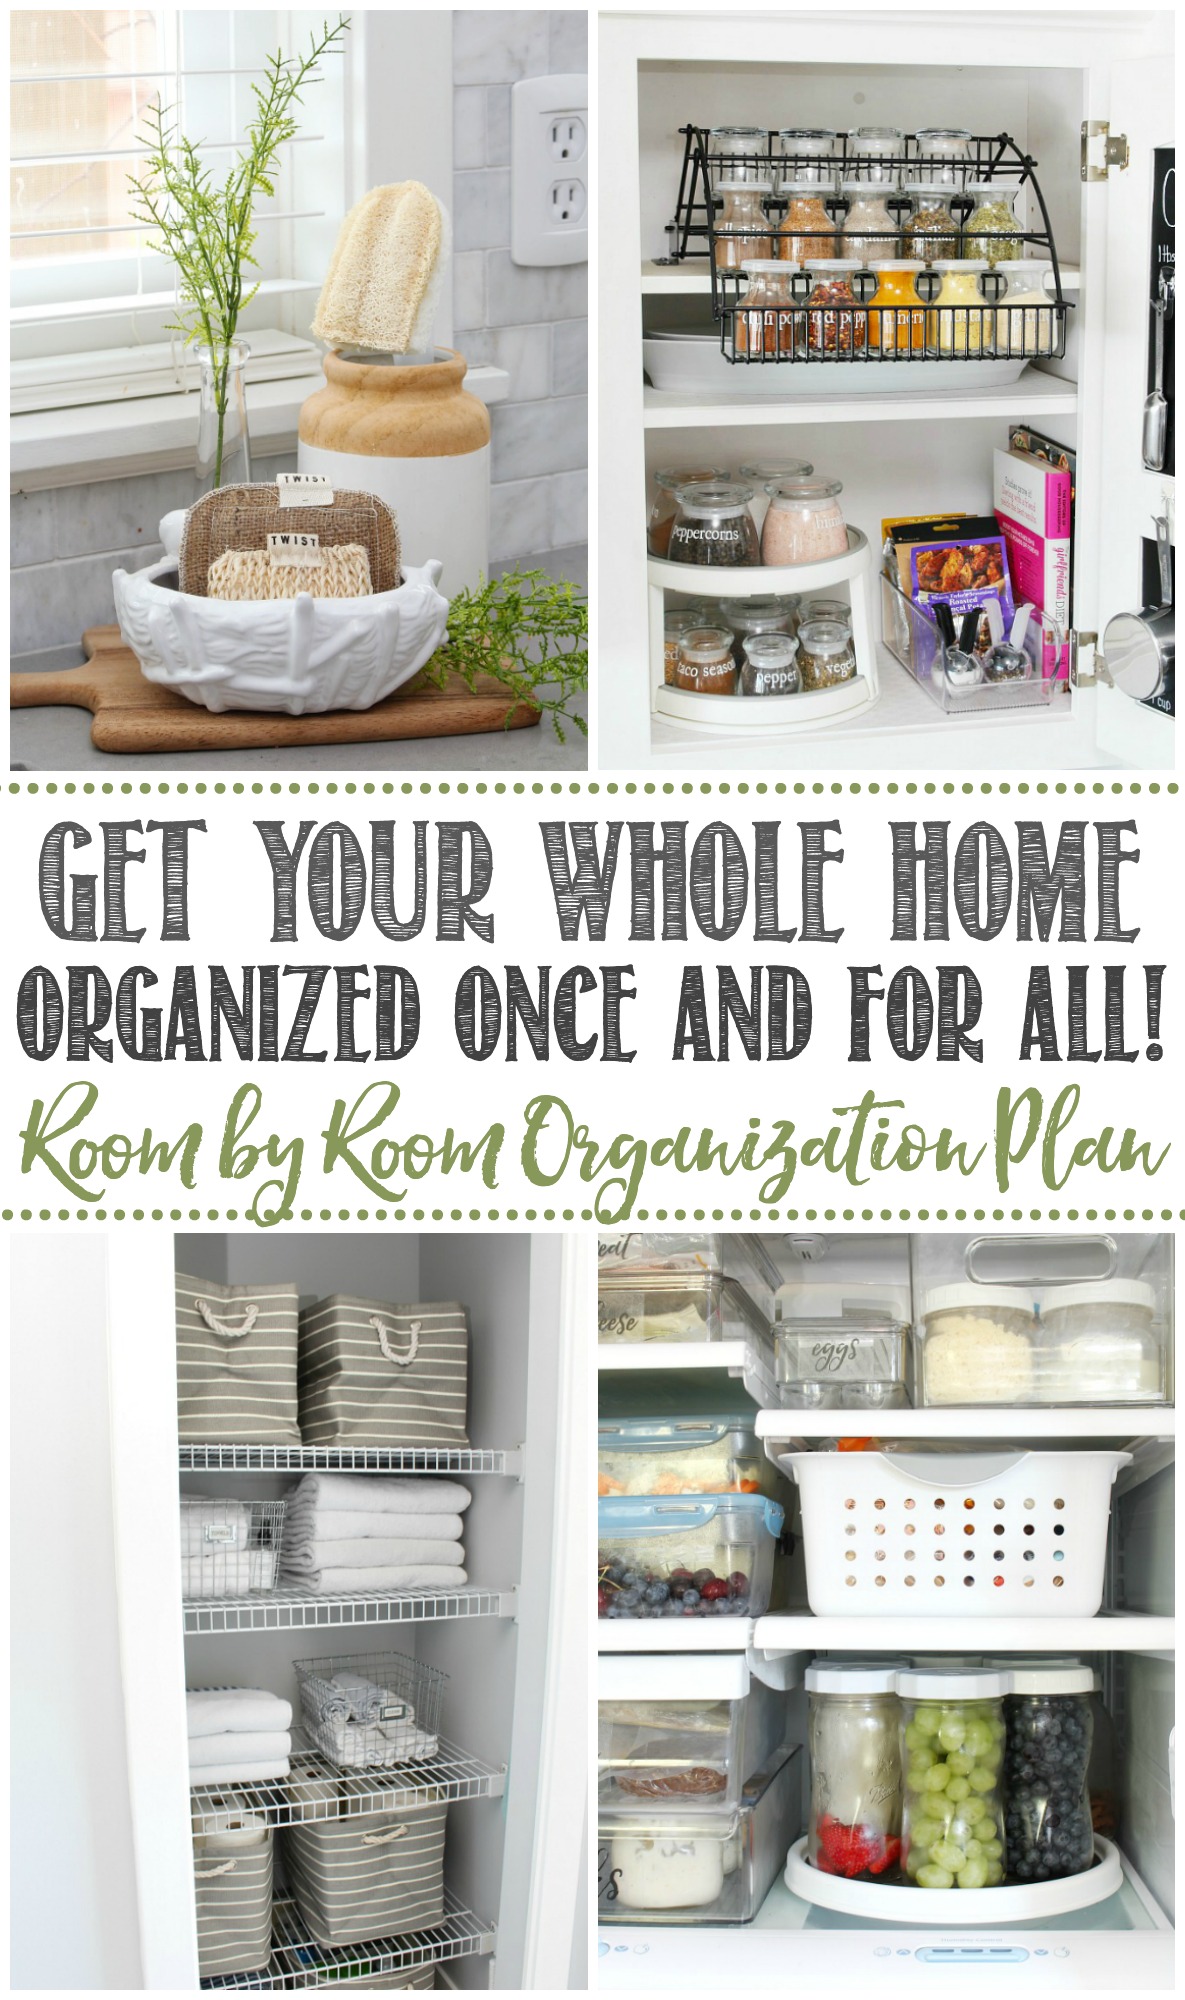 https://www.cleanandscentsible.com/wp-content/uploads/2020/02/The-Household-Organization-Diet-Printables.jpg